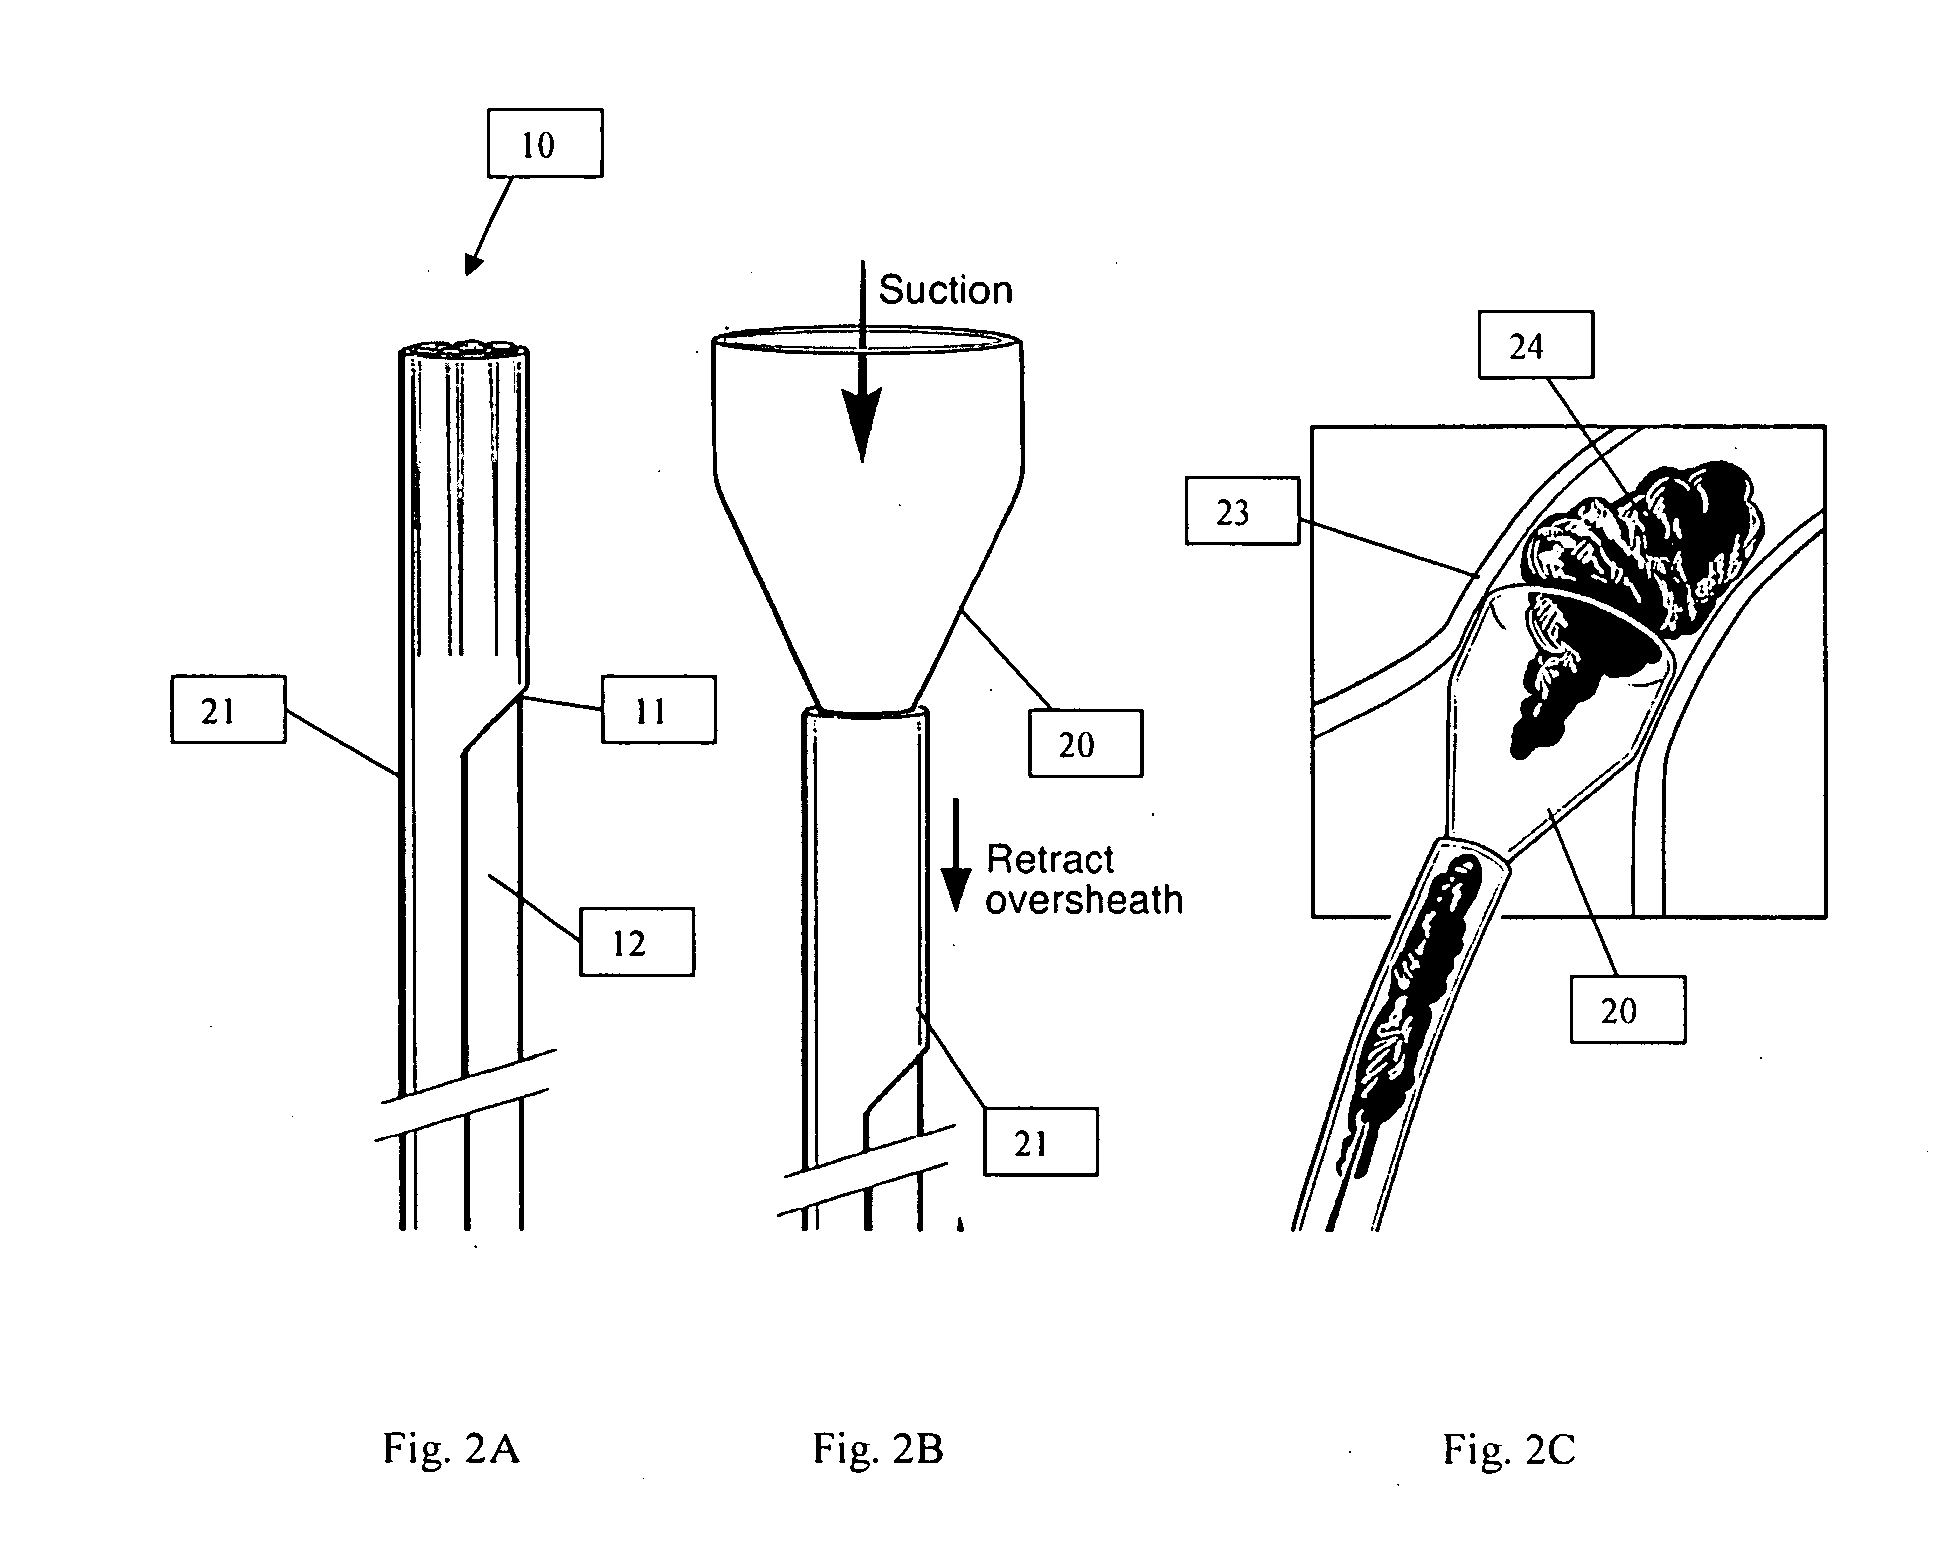 Systems and methods for removing undesirable material within a circulatory system